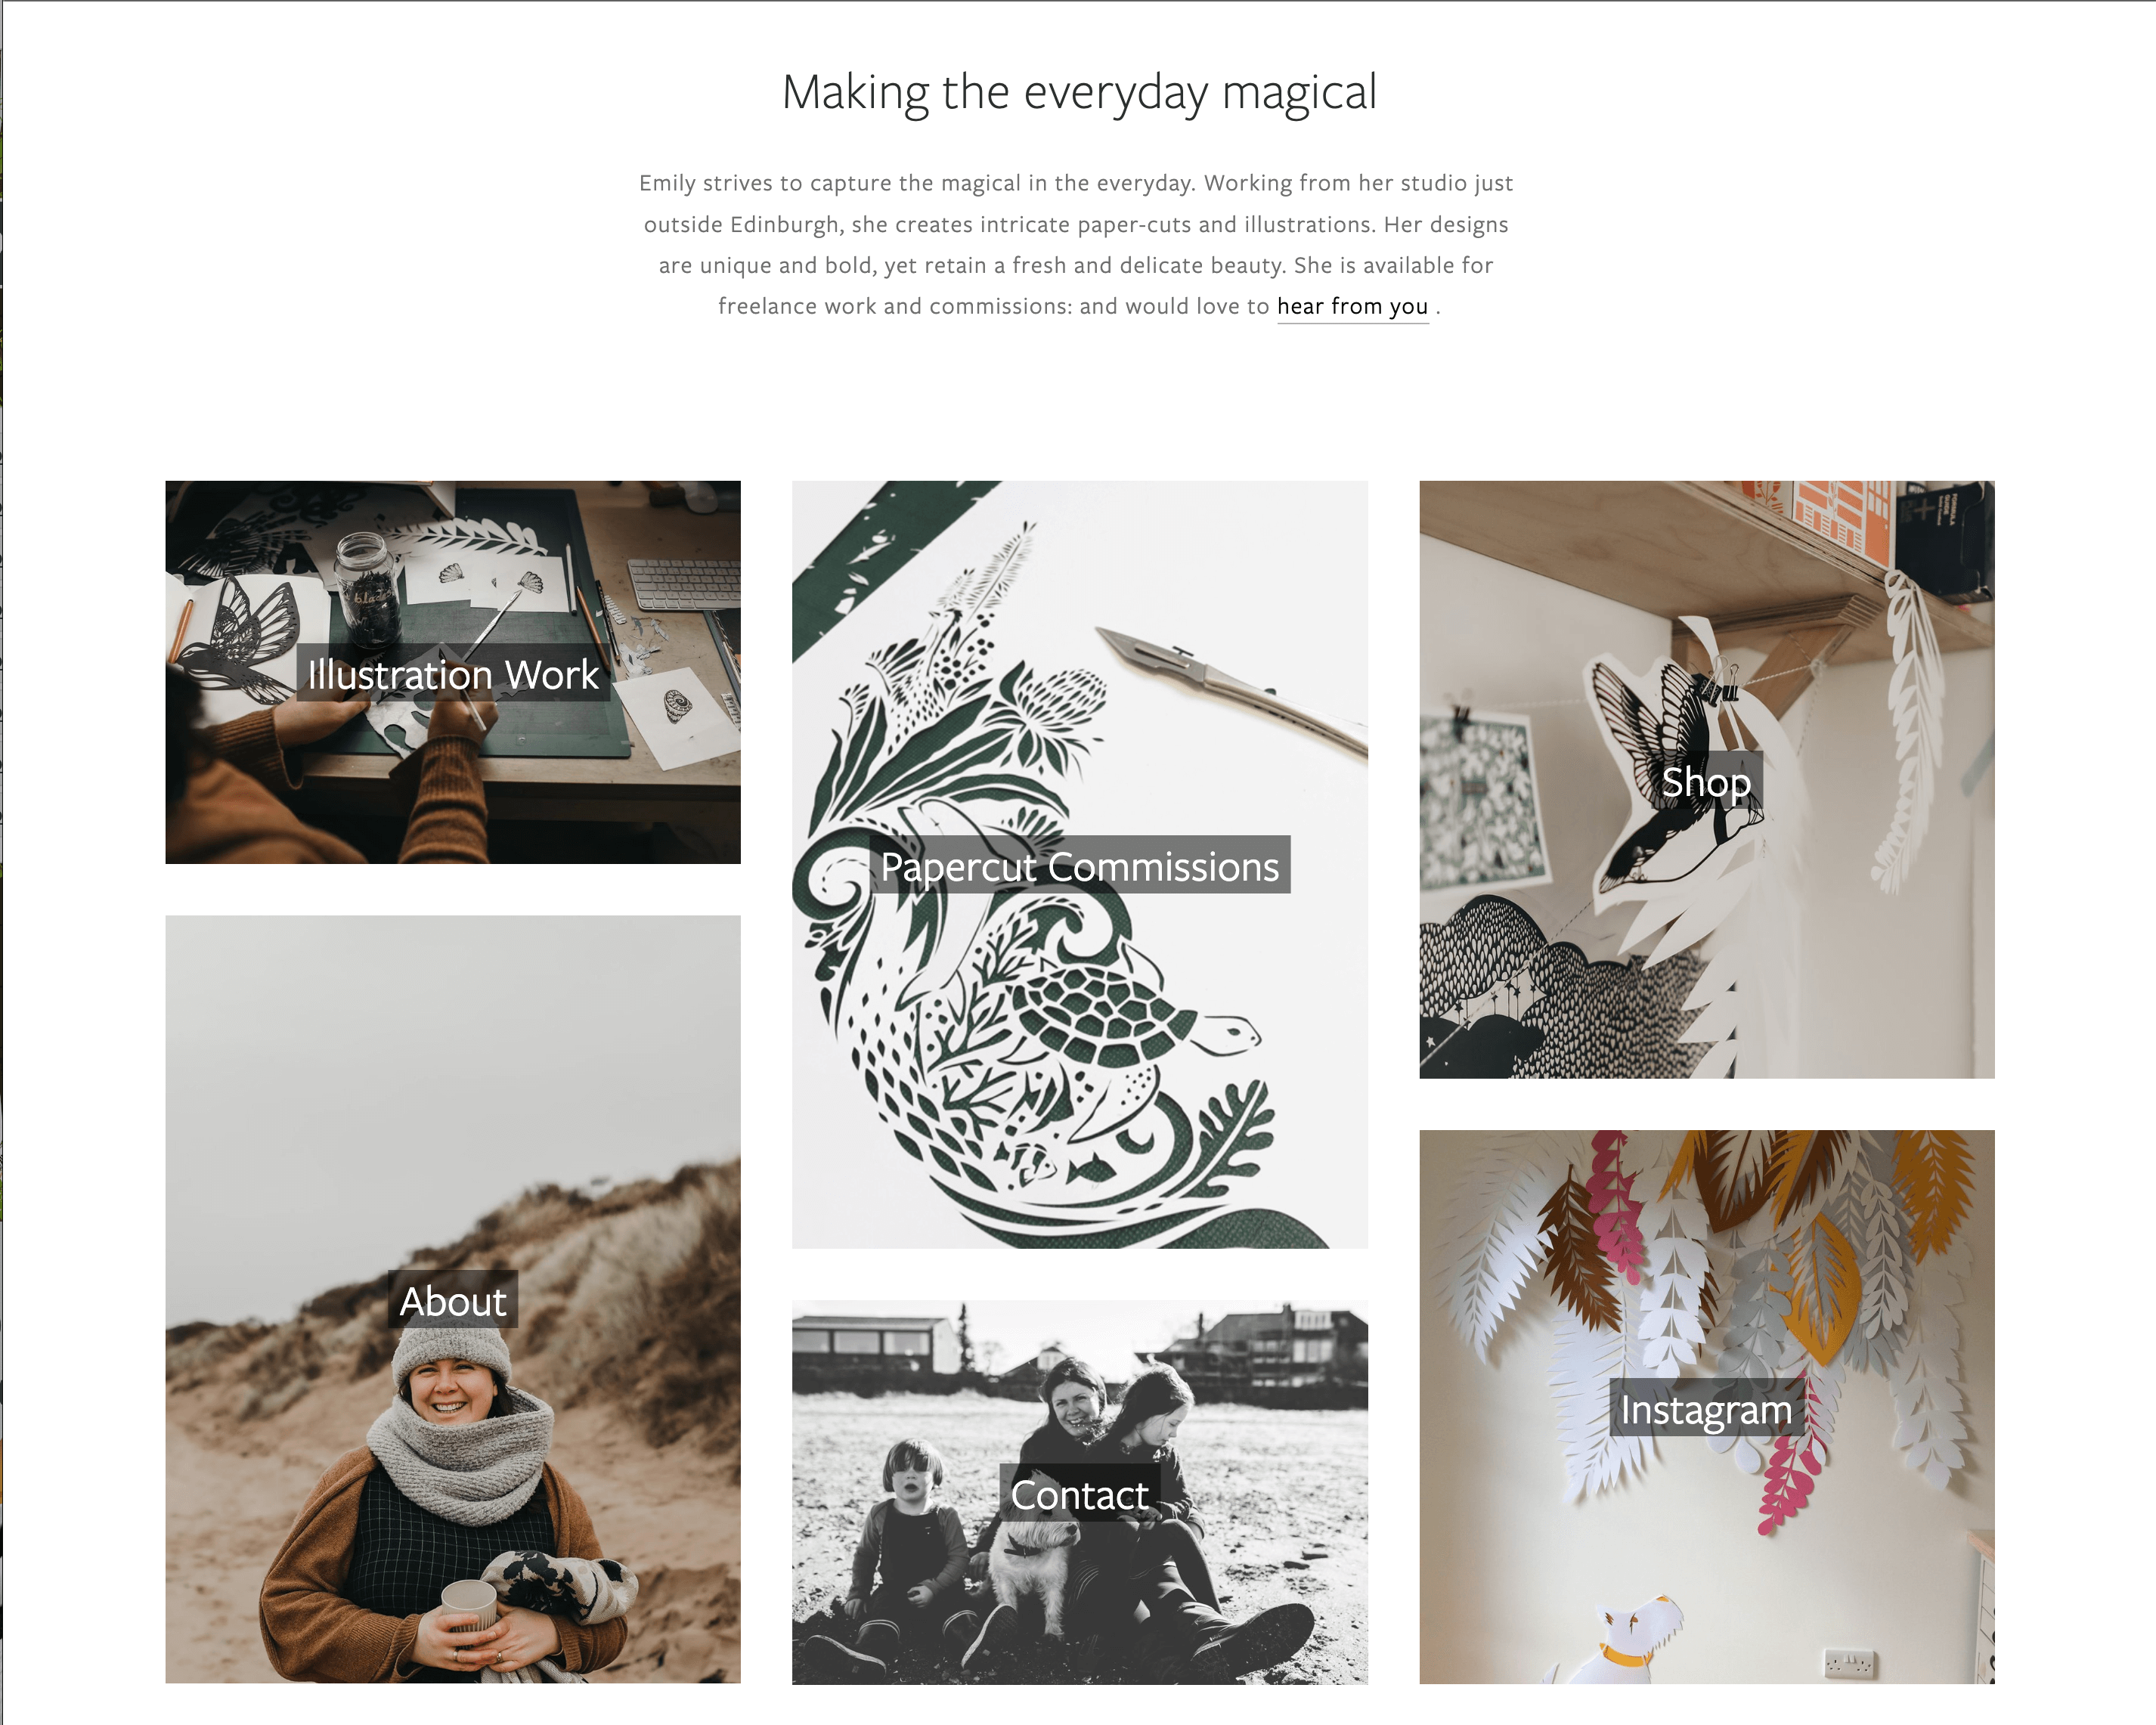 The home page for artist Emily Hogarth. The headline reads "Making the everyday magical. A series of images of her work link to other pages including "Illustration work," "Papercut commissions", "Shop", "About", "Contact," and "Instagram."